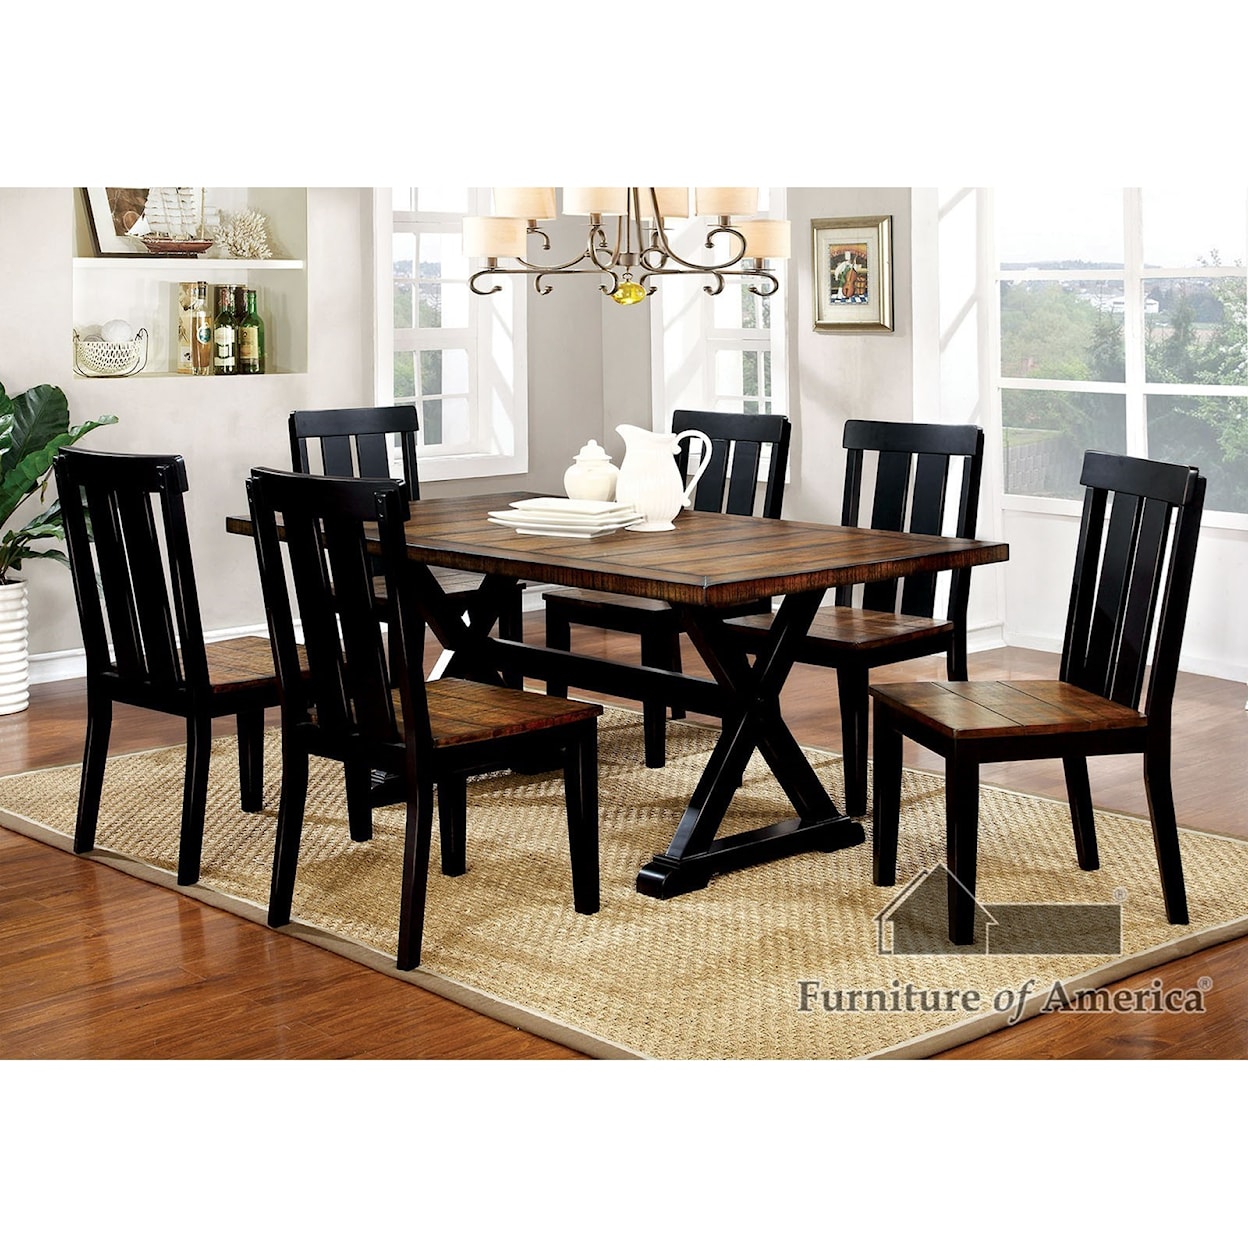 Furniture of America Alana Dining Table